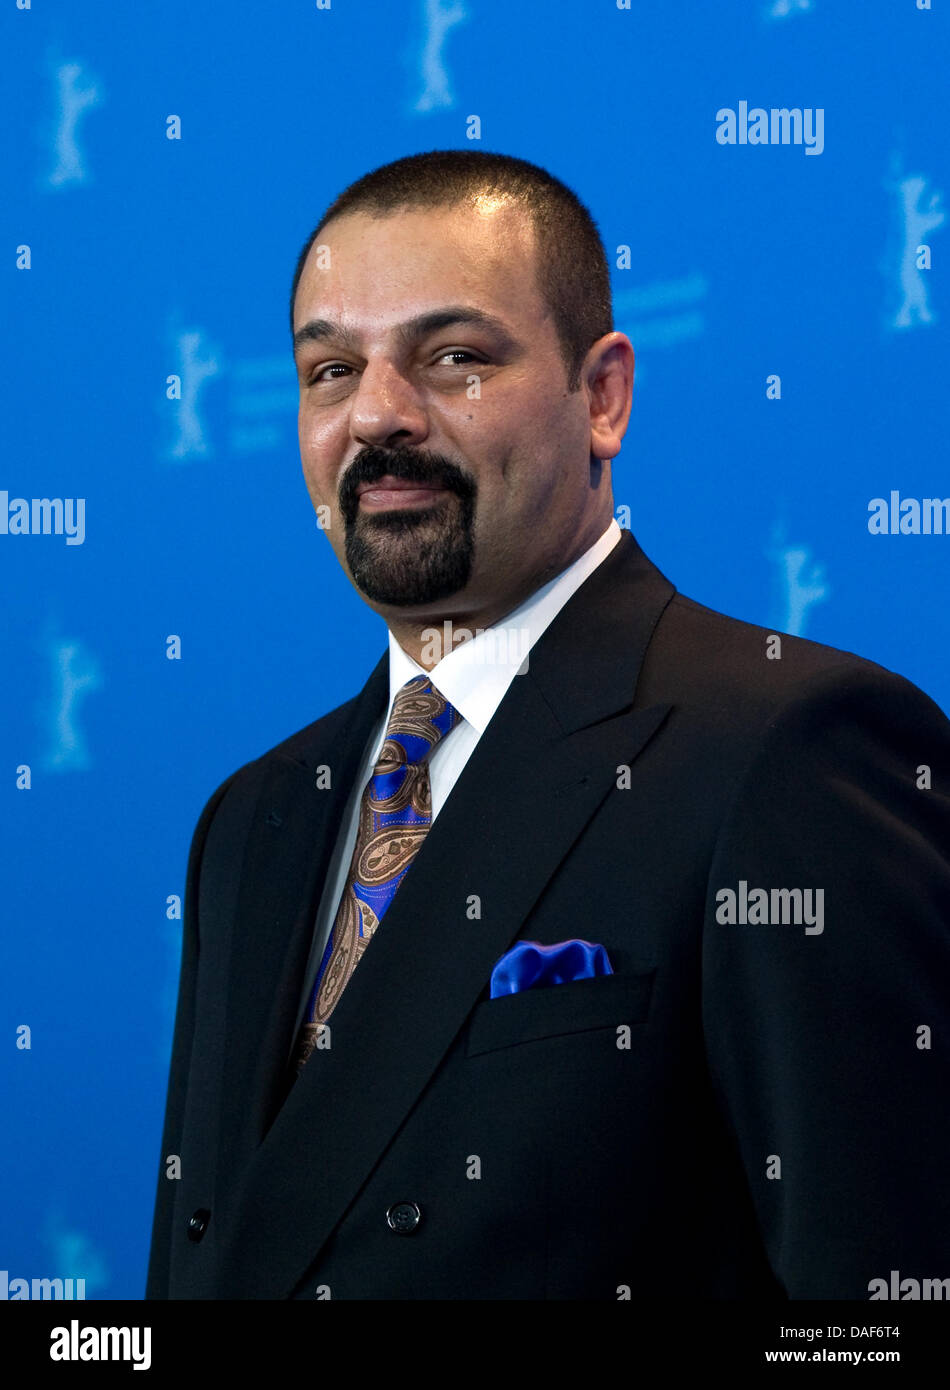 Iraqi author Latif Yahia poses during the photocall for the film 'The Devil's Double' (during the 61st Berlin International Film Festival in Berlin, Germany, 11 February 2011. The film is running in the section Panorama special of the International Film Festival. The 61st Berlinale takes place from 10 to 20 February 2011. Photo: Arno Burgi Stock Photo